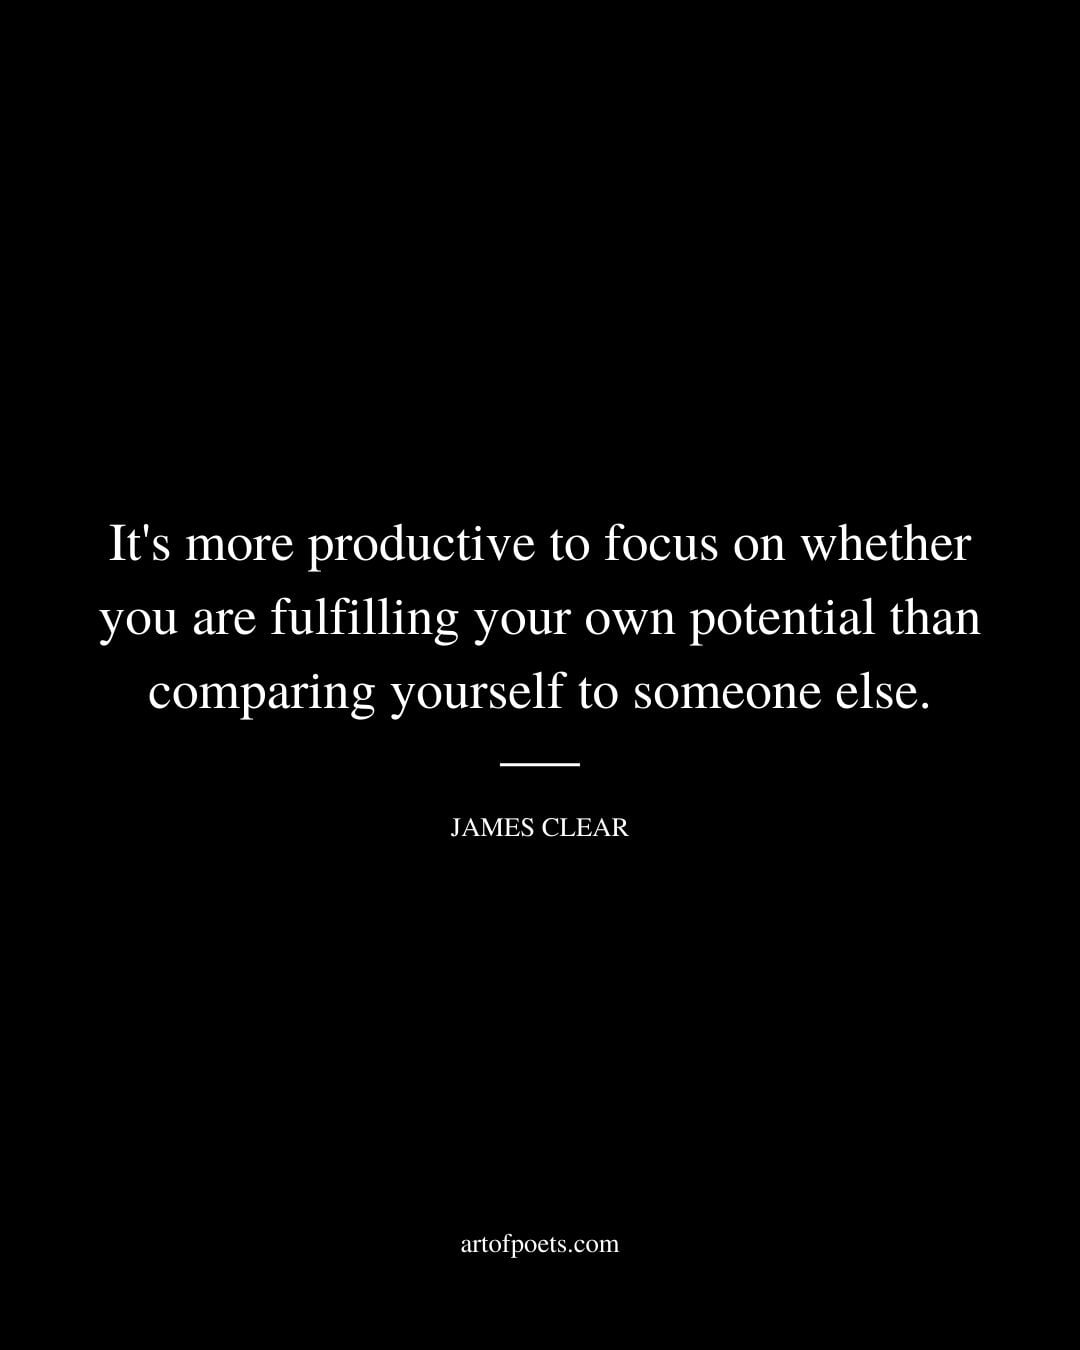 Its more productive to focus on whether you are fulfilling your own potential than comparing yourself to someone else